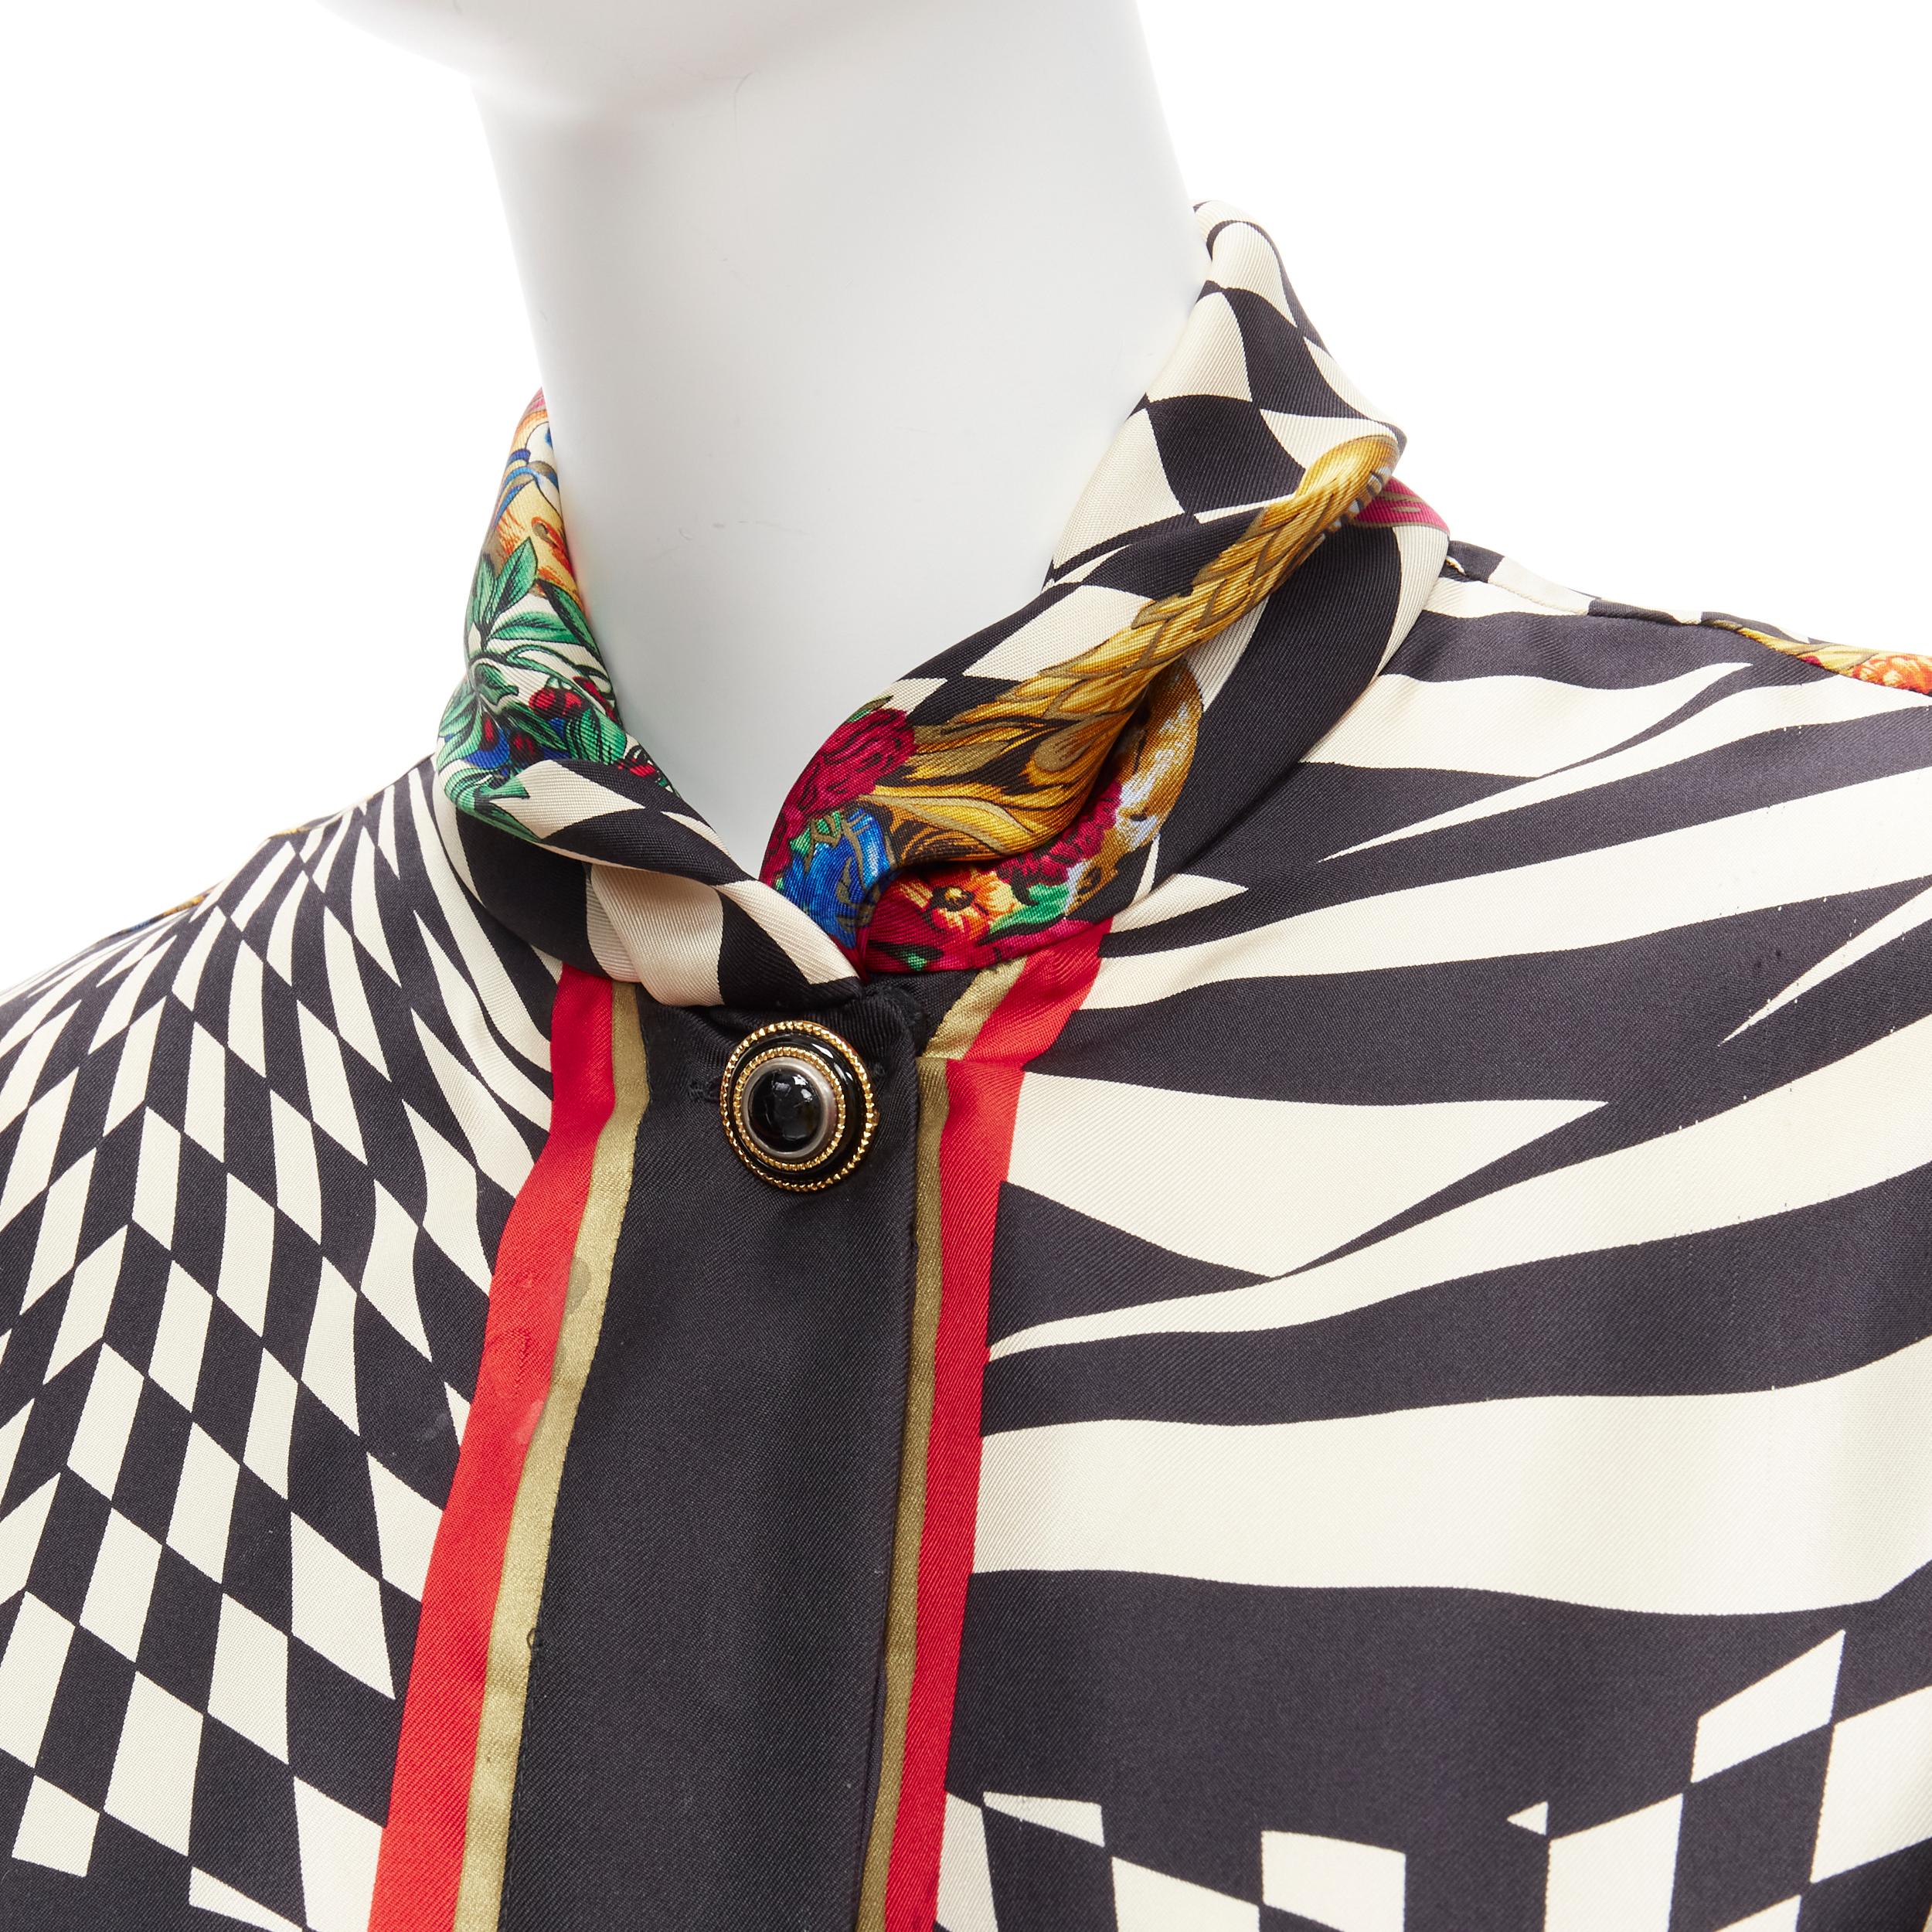 GIANNI VERSACE Vintage baroque royal optical graphic print gold button collar shirt IT38 XS
Reference: TGAS/D00340
Brand: Gianni Versace
Designer: Gianni Versace
Material: Silk, Polyester
Color: Multicolour
Pattern: Barocco
Closure: Button
Extra